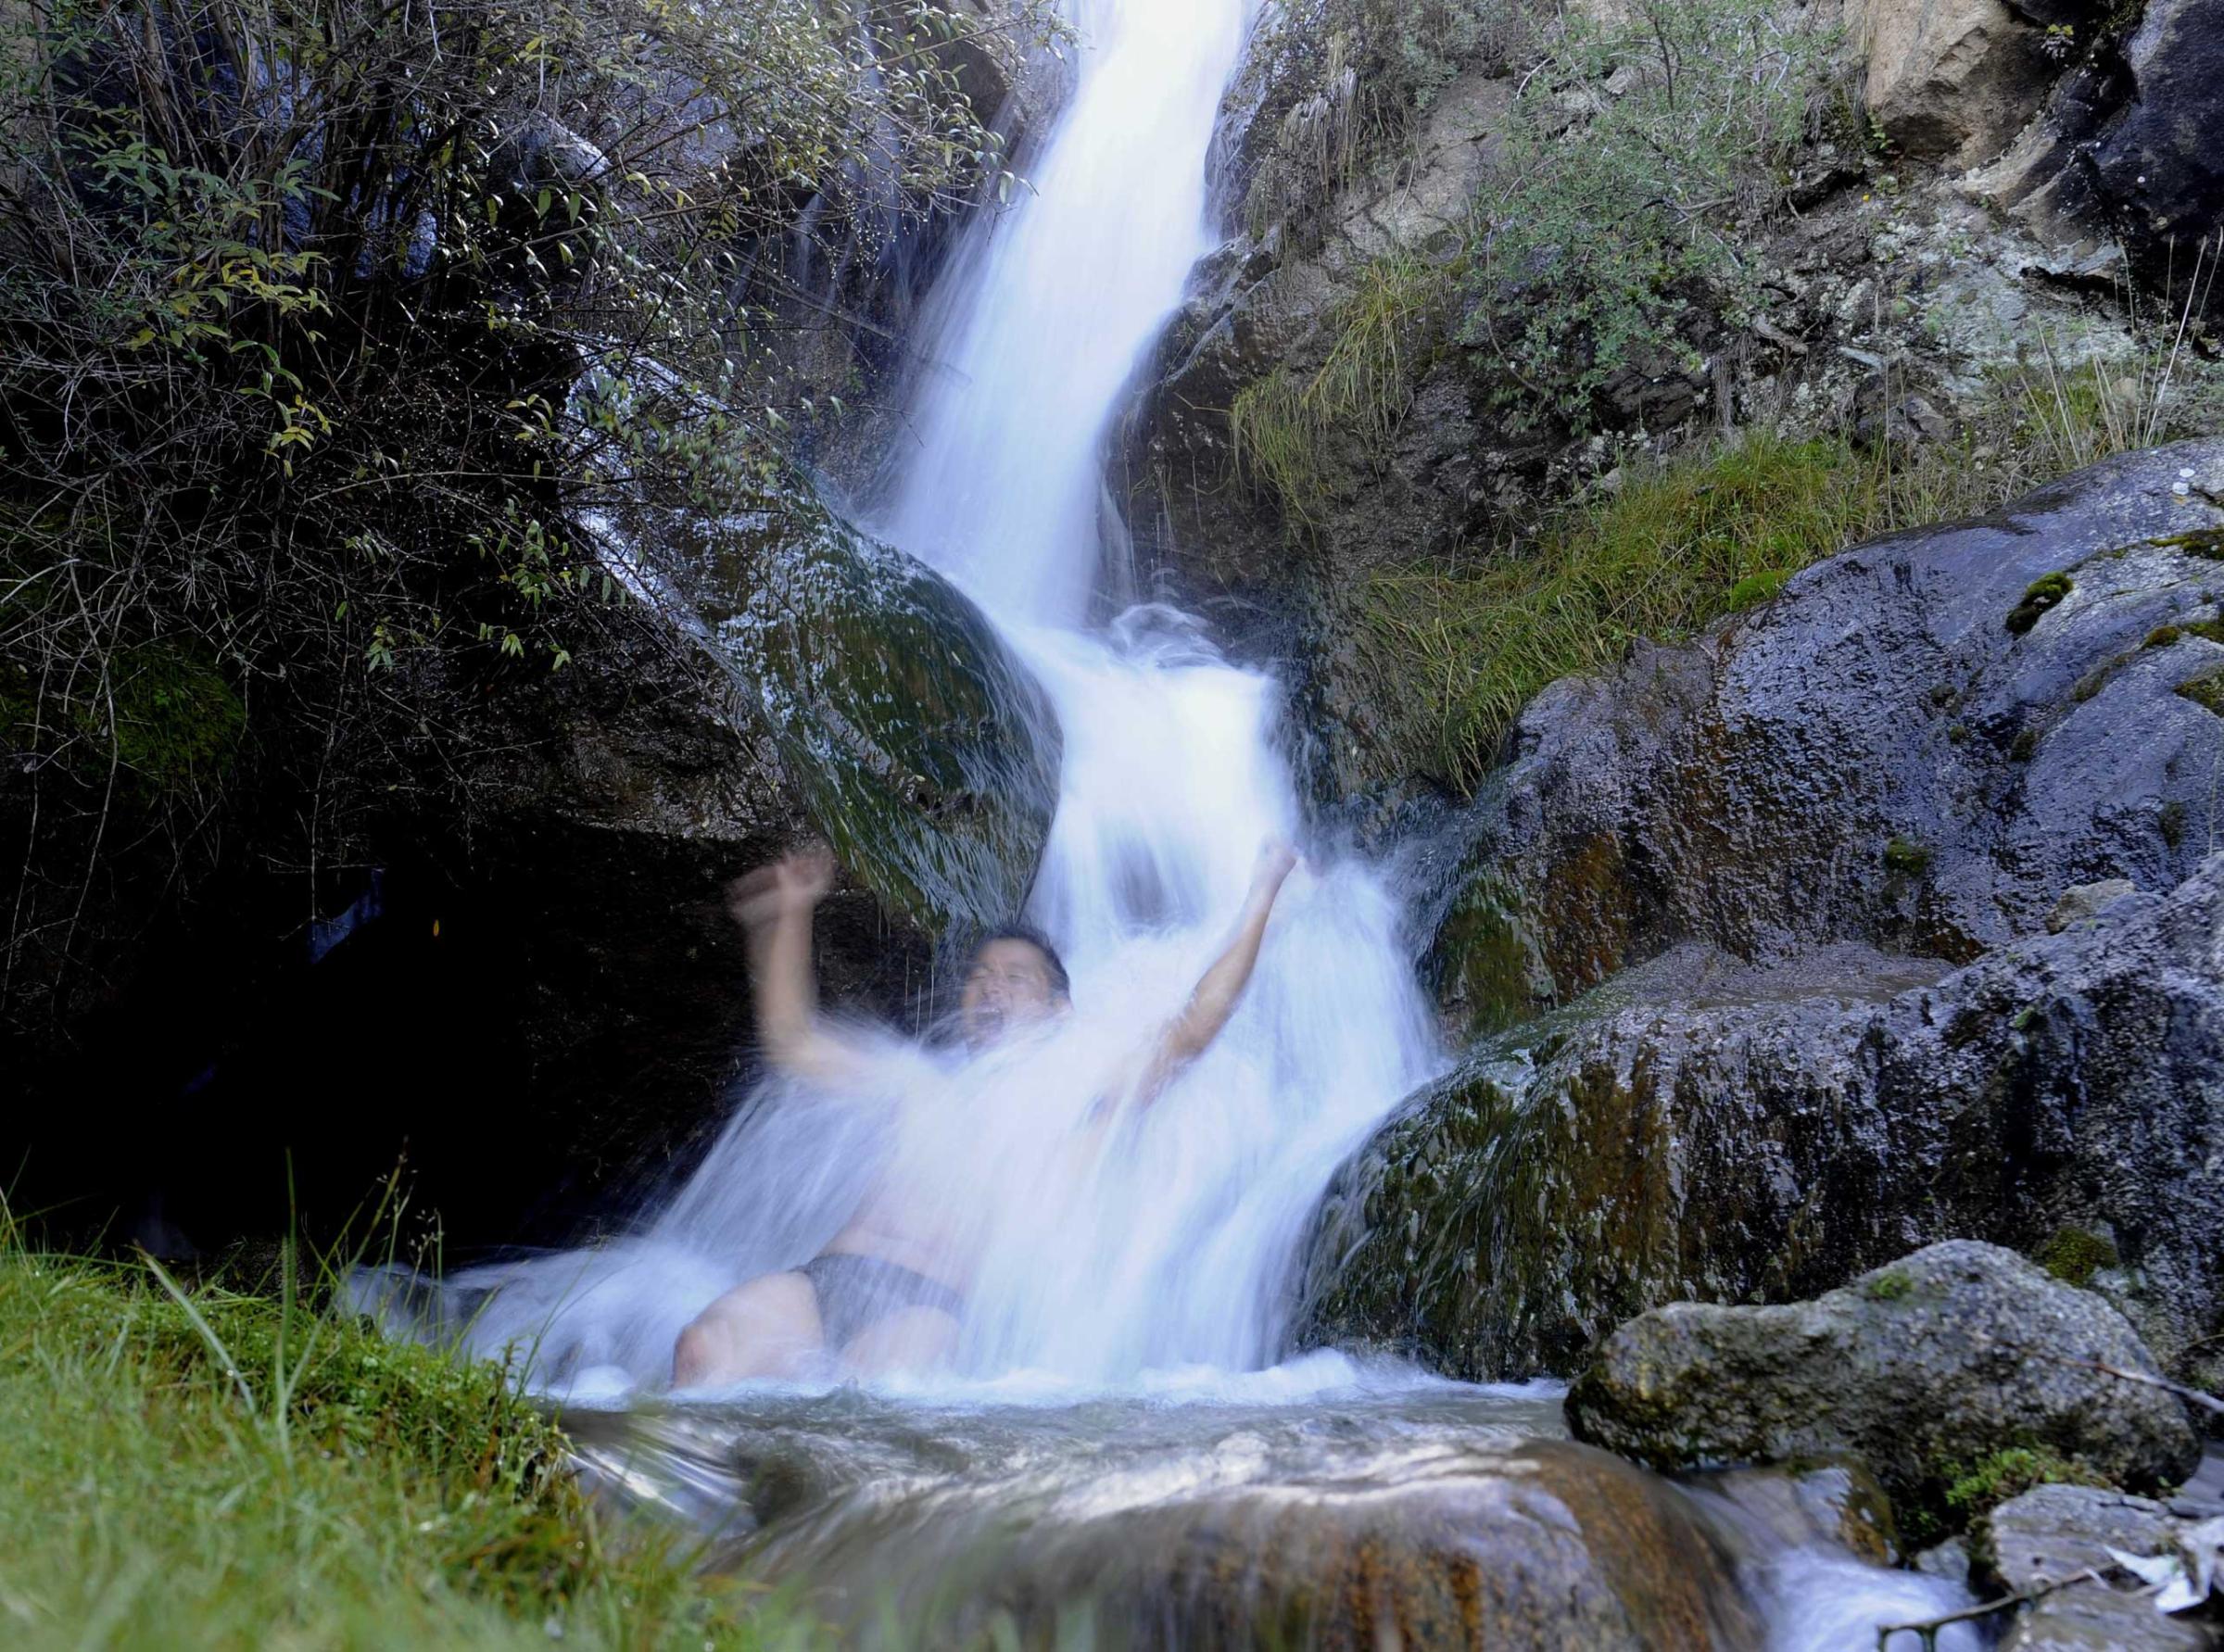 A man takes a bath in a stream on the outskirts of Lhasa,